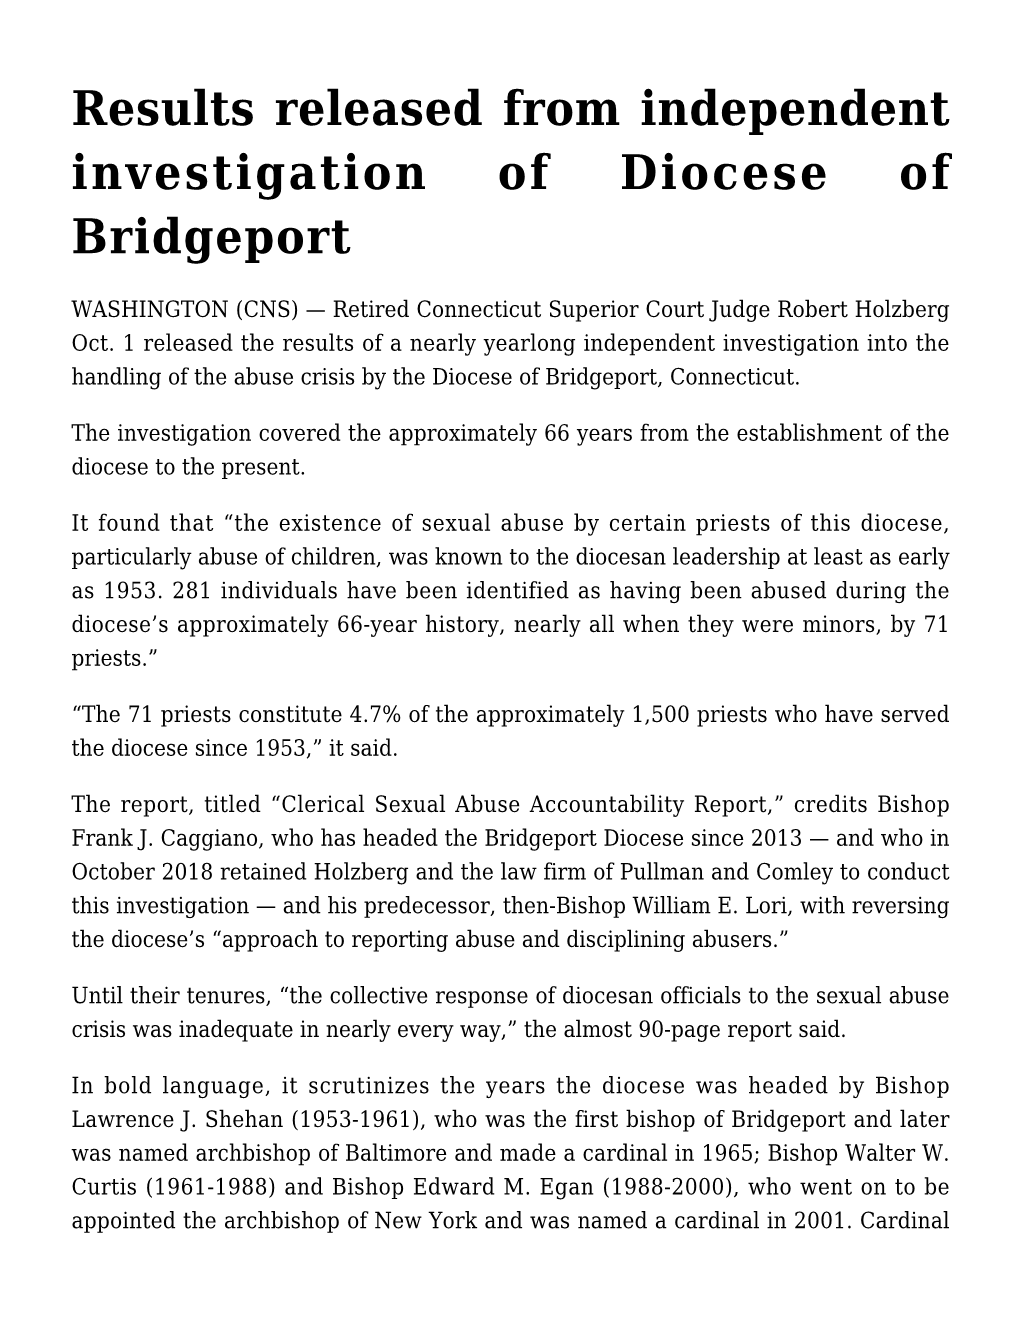 Results Released from Independent Investigation of Diocese of Bridgeport